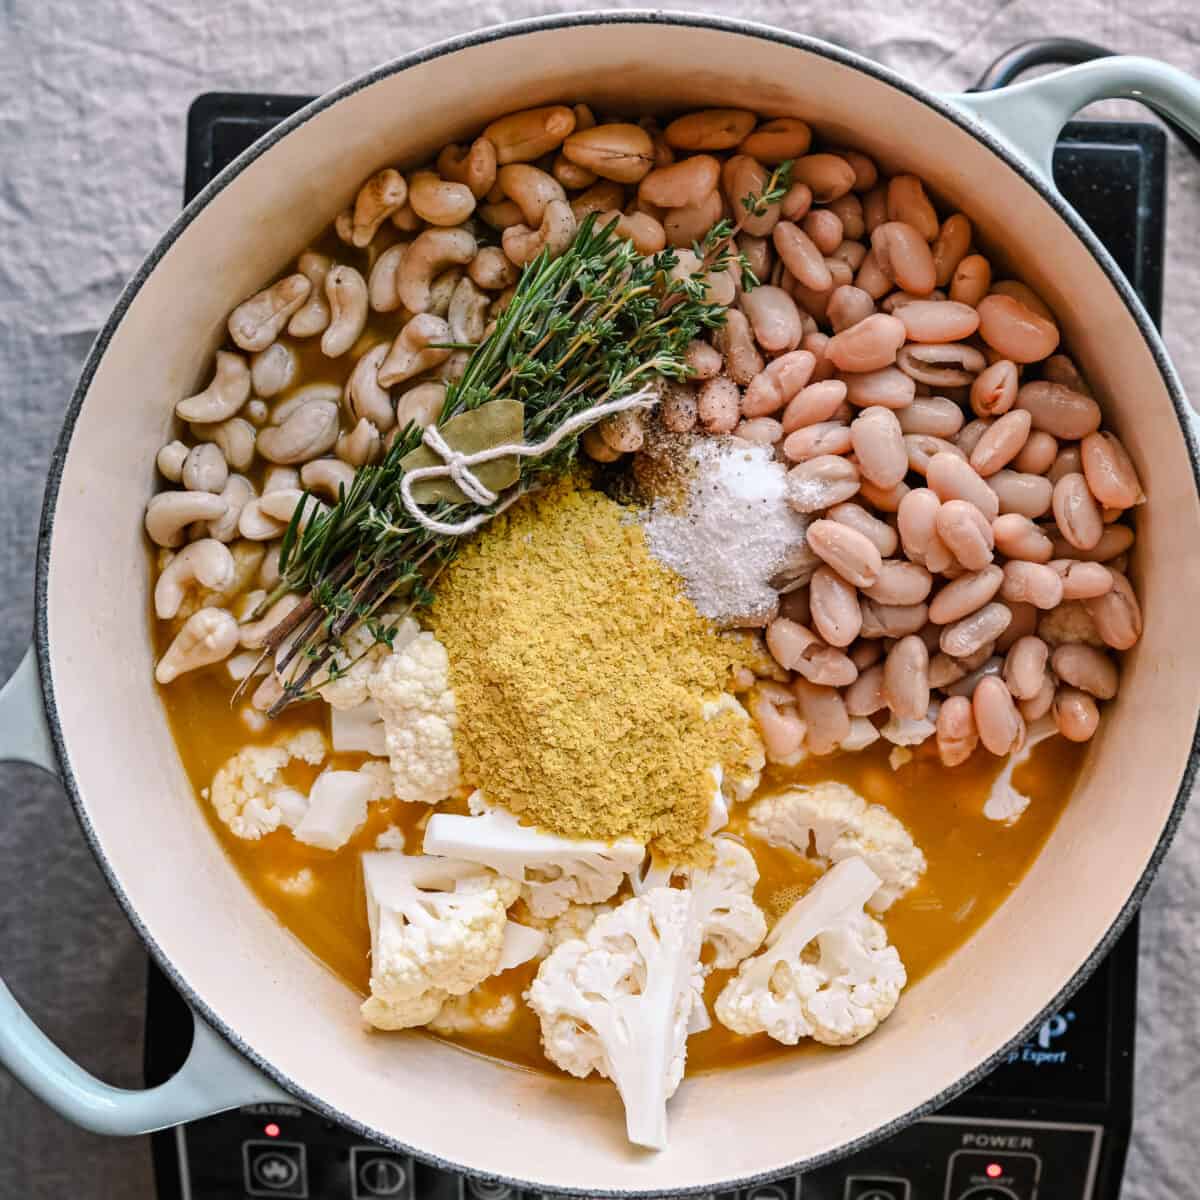 cauliflower florets, nutritional yeast, bouquet garni, cashews and white beans in broth for soup